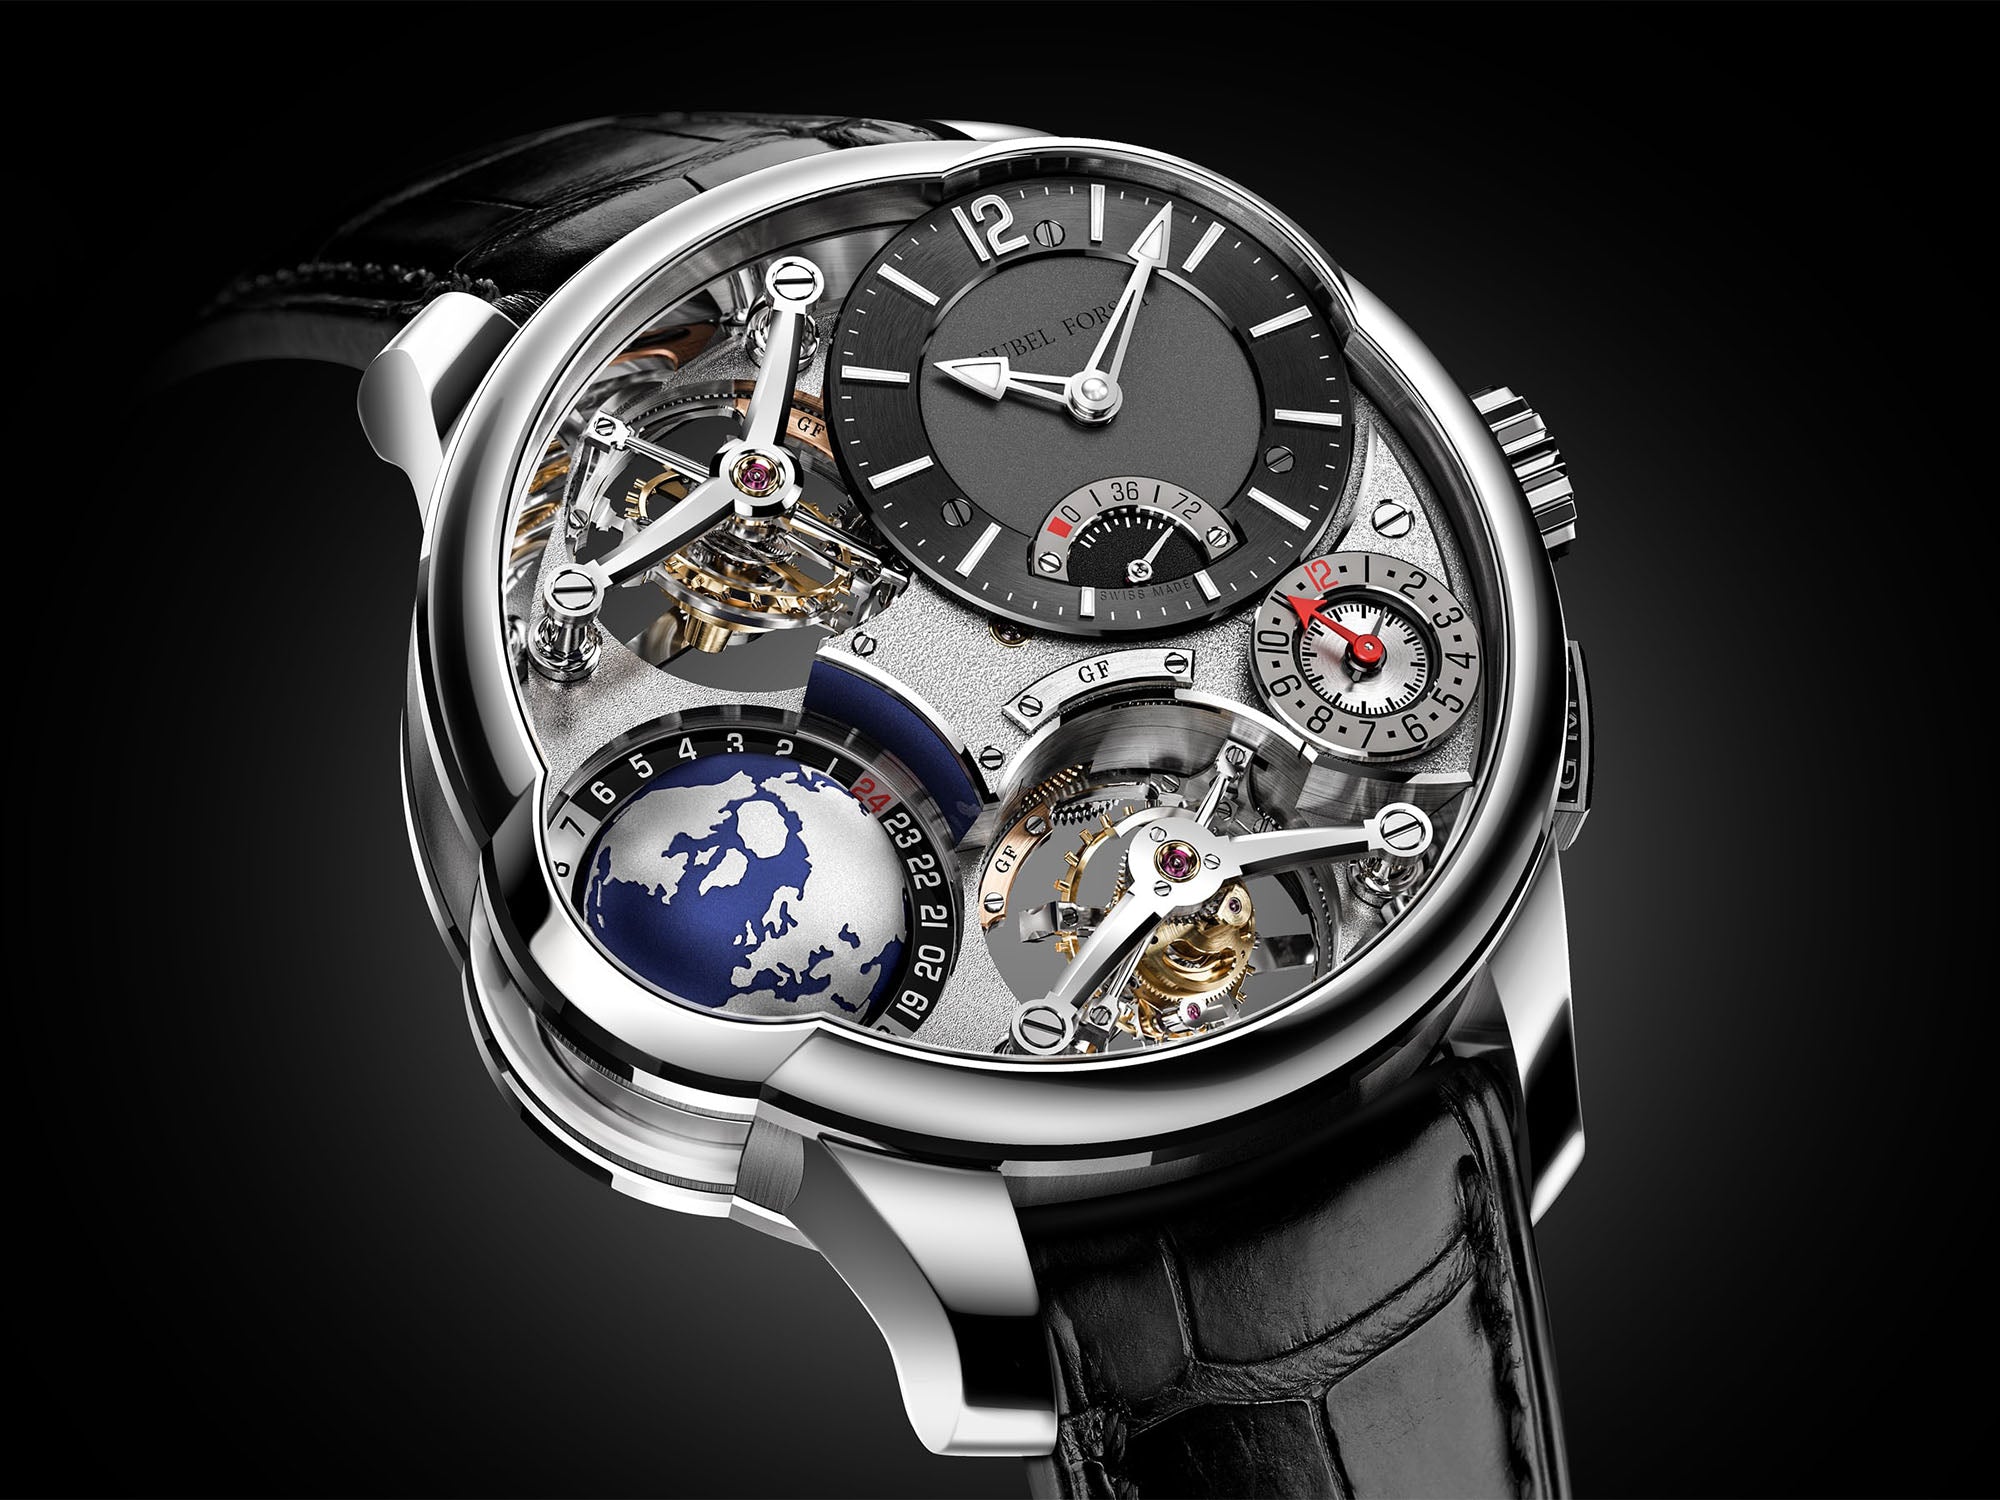 The 10 Most Expensive Watch Brands In The World | vlr.eng.br